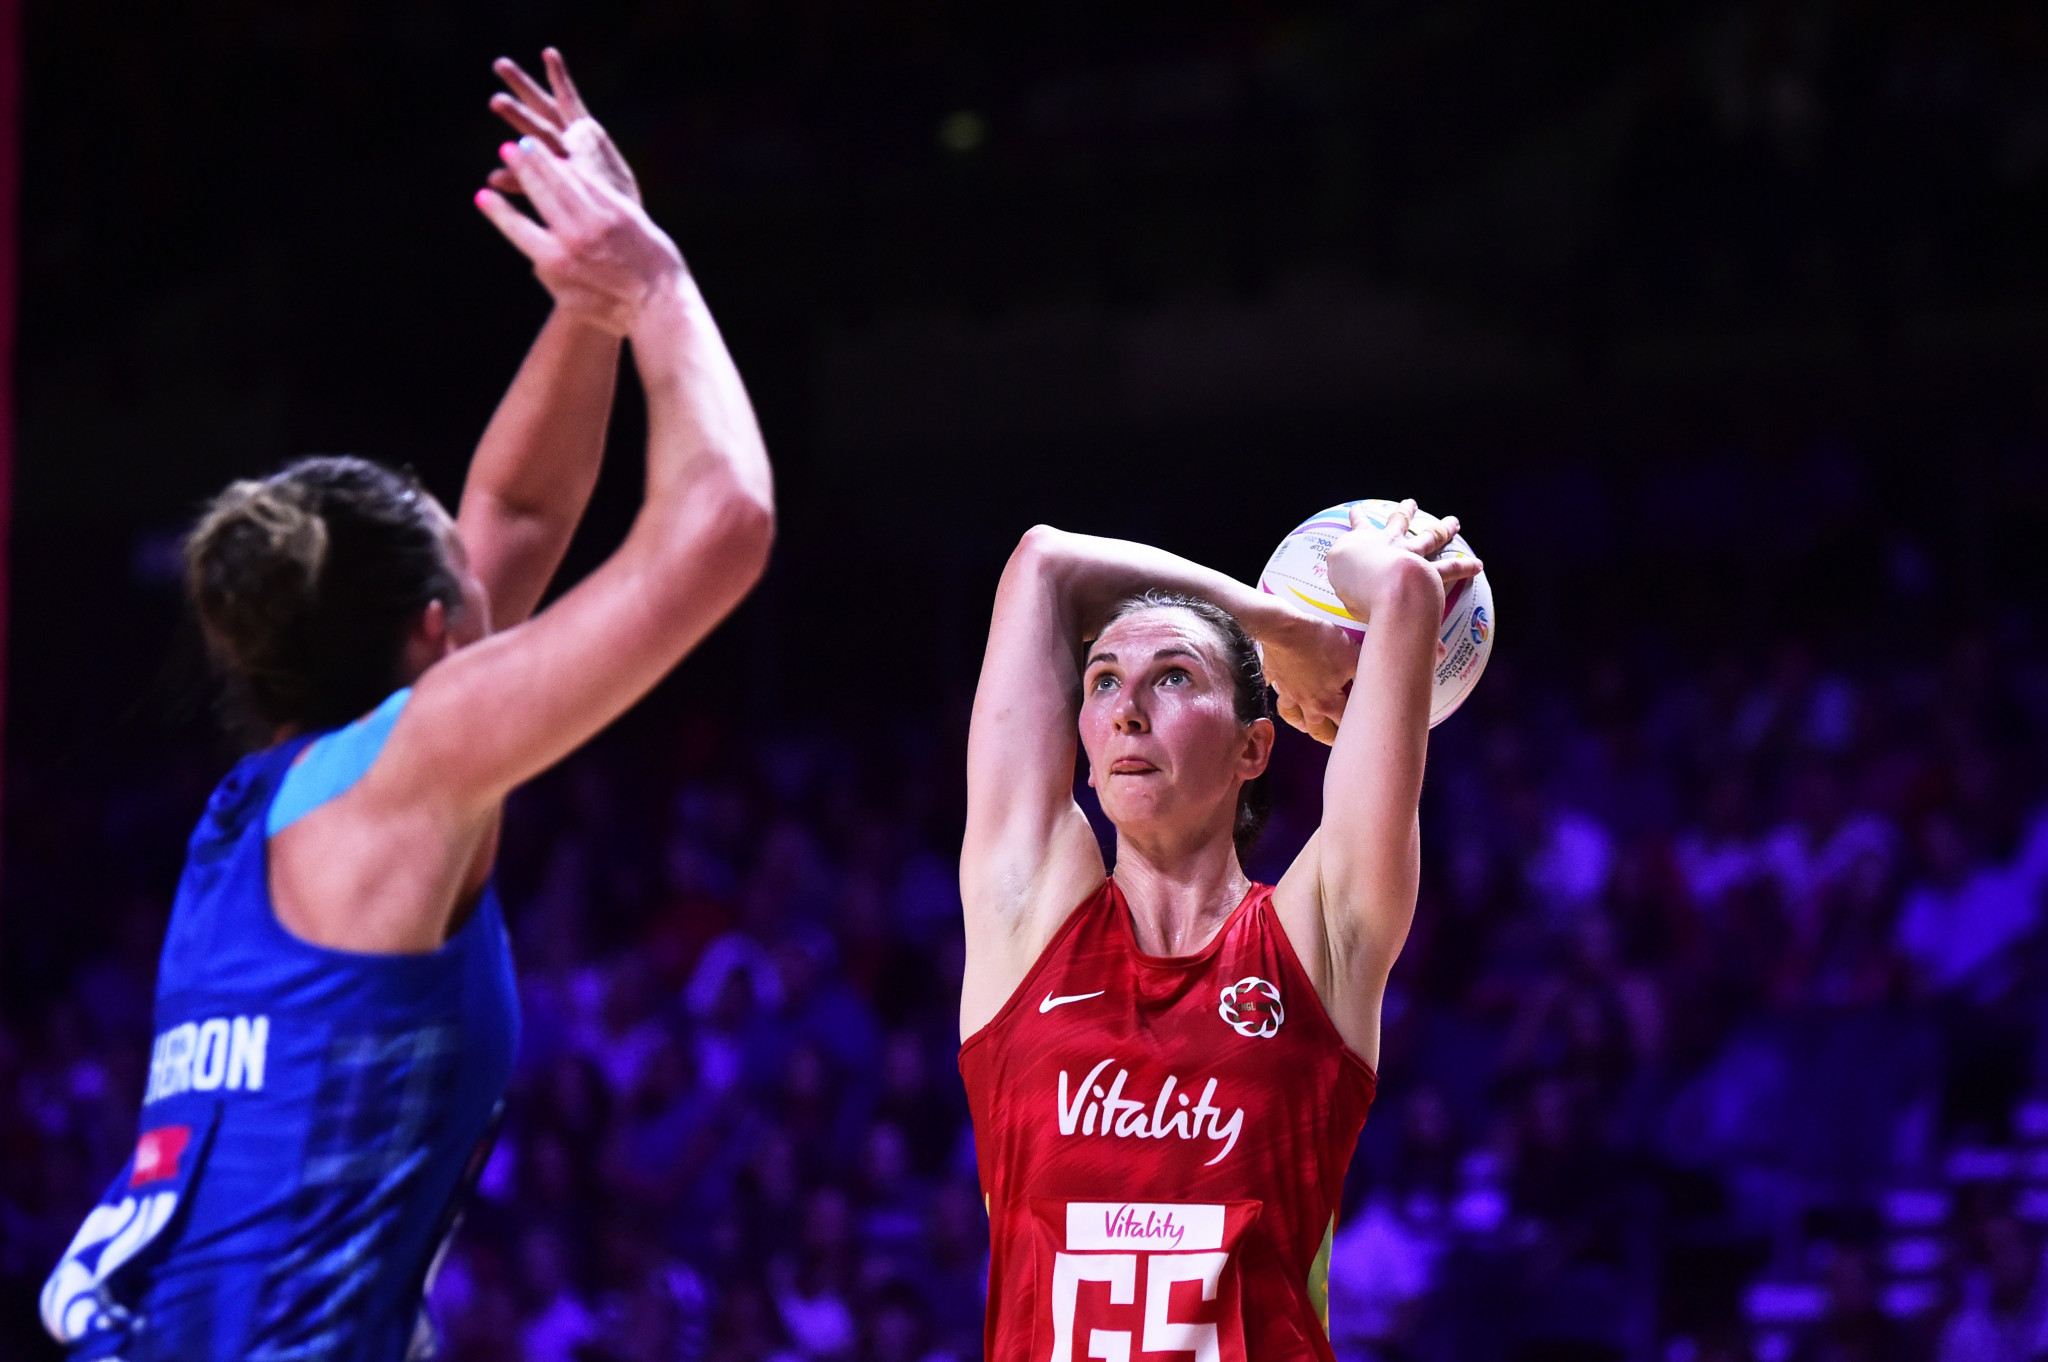 England beat Scotland for their second victory of the Netball World Cup in Liverpool ©Getty Images